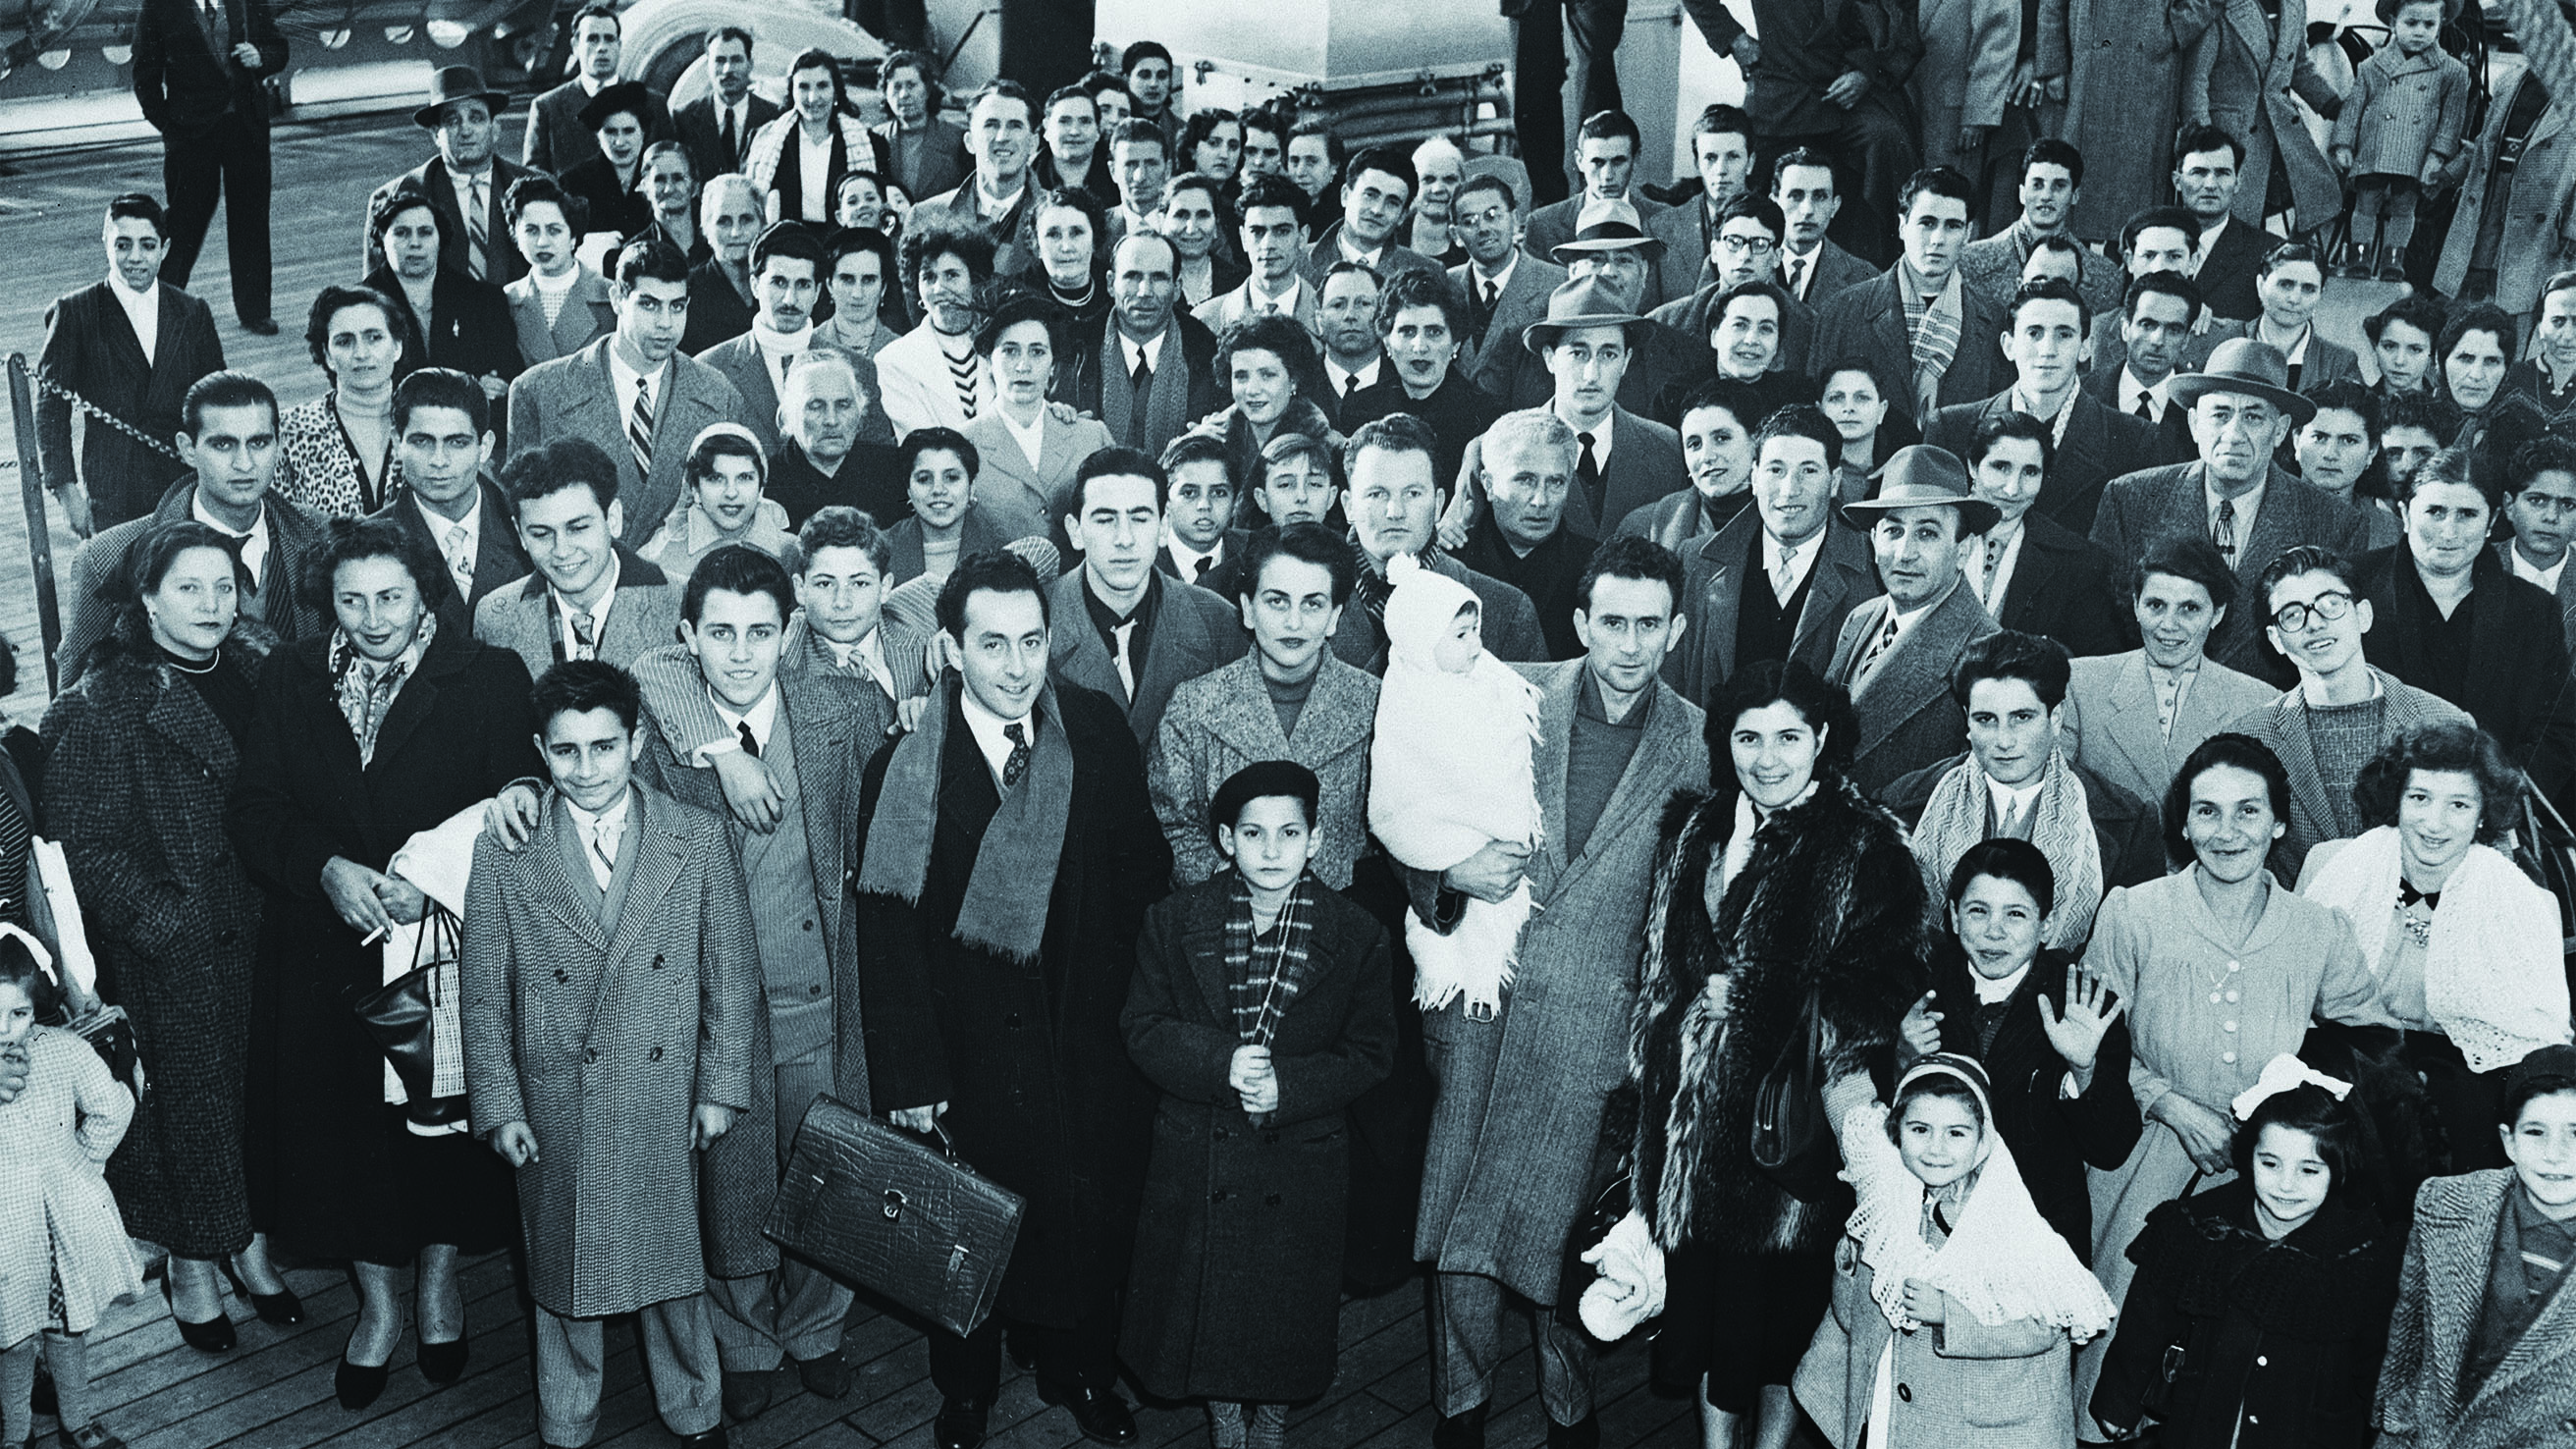 Immigrants arriving in New York from Genoa, Italy, on the deck of the liner SS Conte Giancamano at Christmas 1953. (Bettmann/Getty Images)